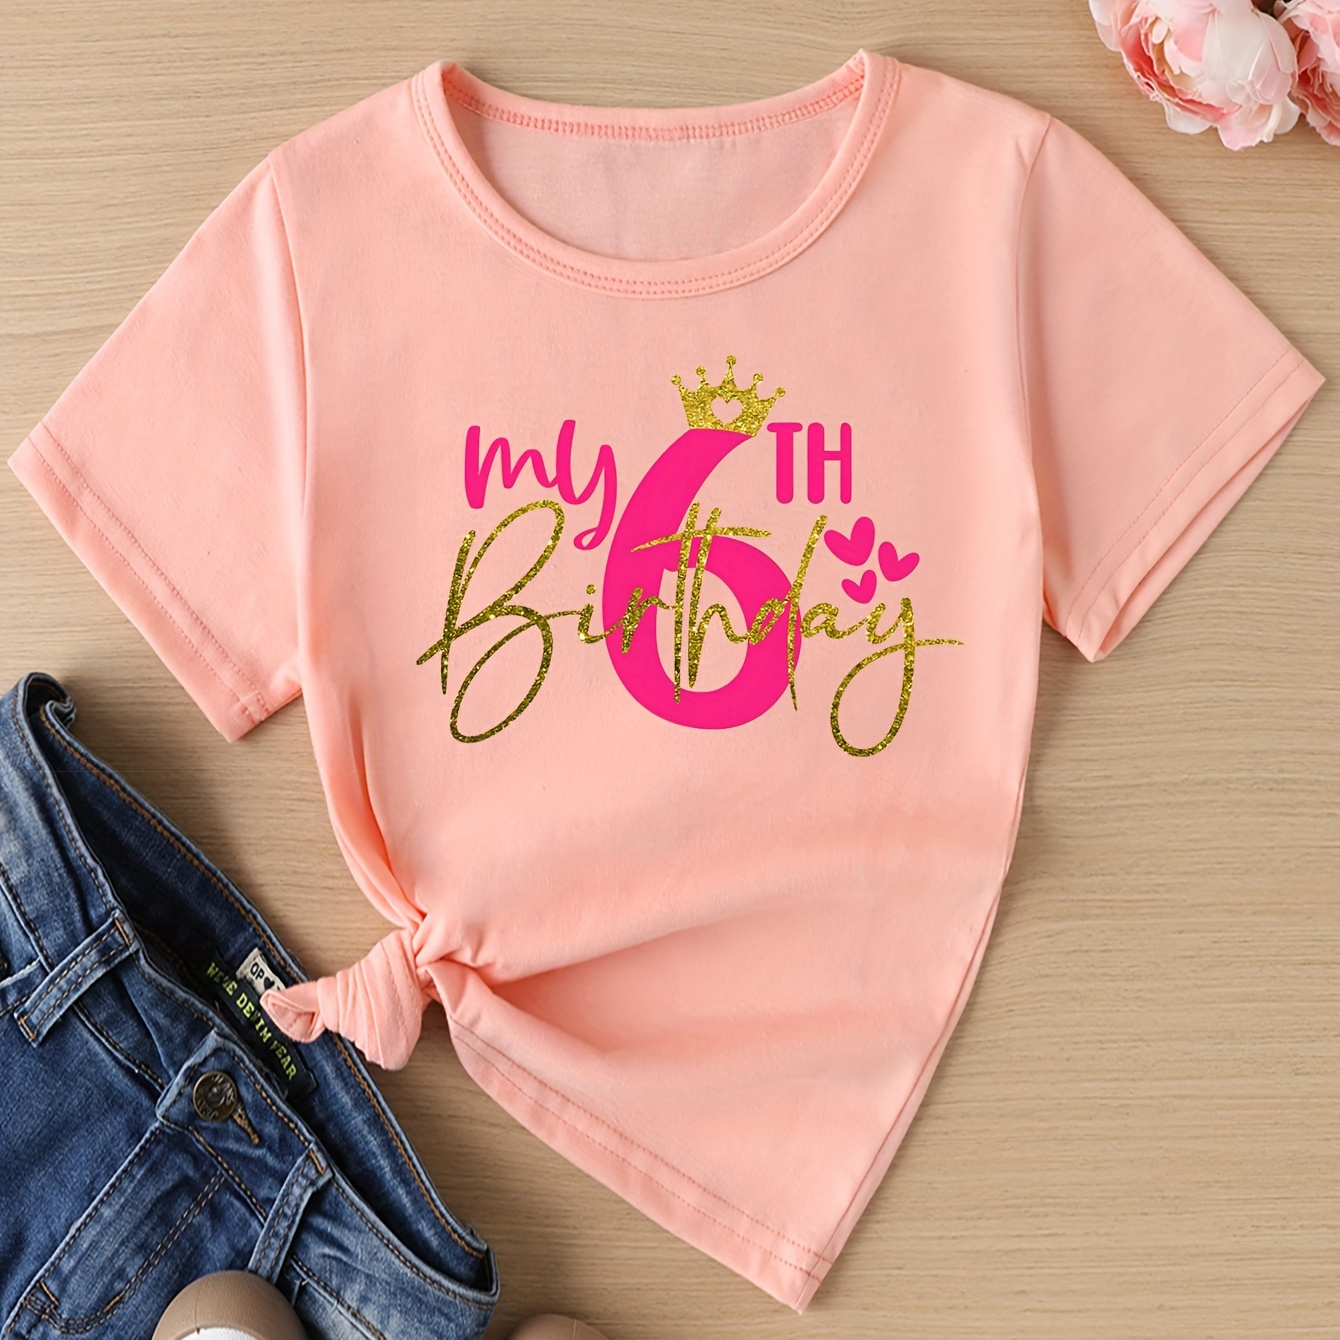 

My 6th Birthday & Crown Graphic Print, Girls' Casual & Comfy Crew Neck Short Sleeve T-shirt For Spring & Summer, Girls' Clothes For Outdoor Activities